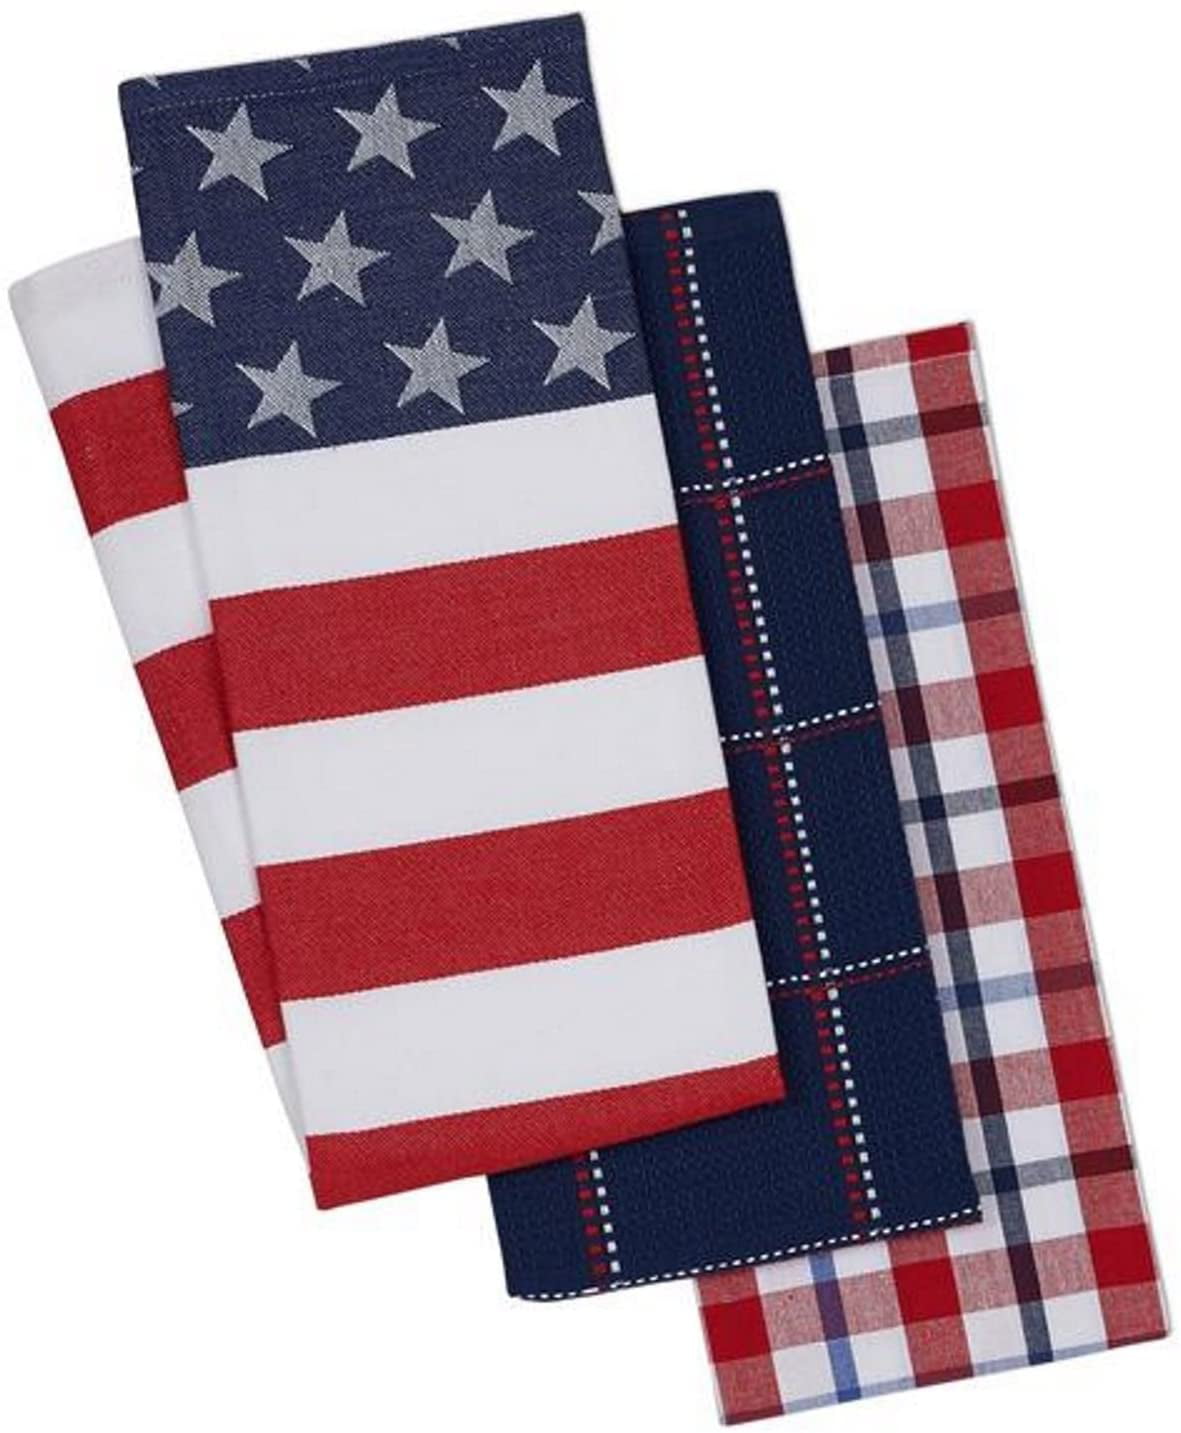 Cherry Plaid Tartan Red White Blue Linen Cotton Tea Towels by Roostery Set of 2